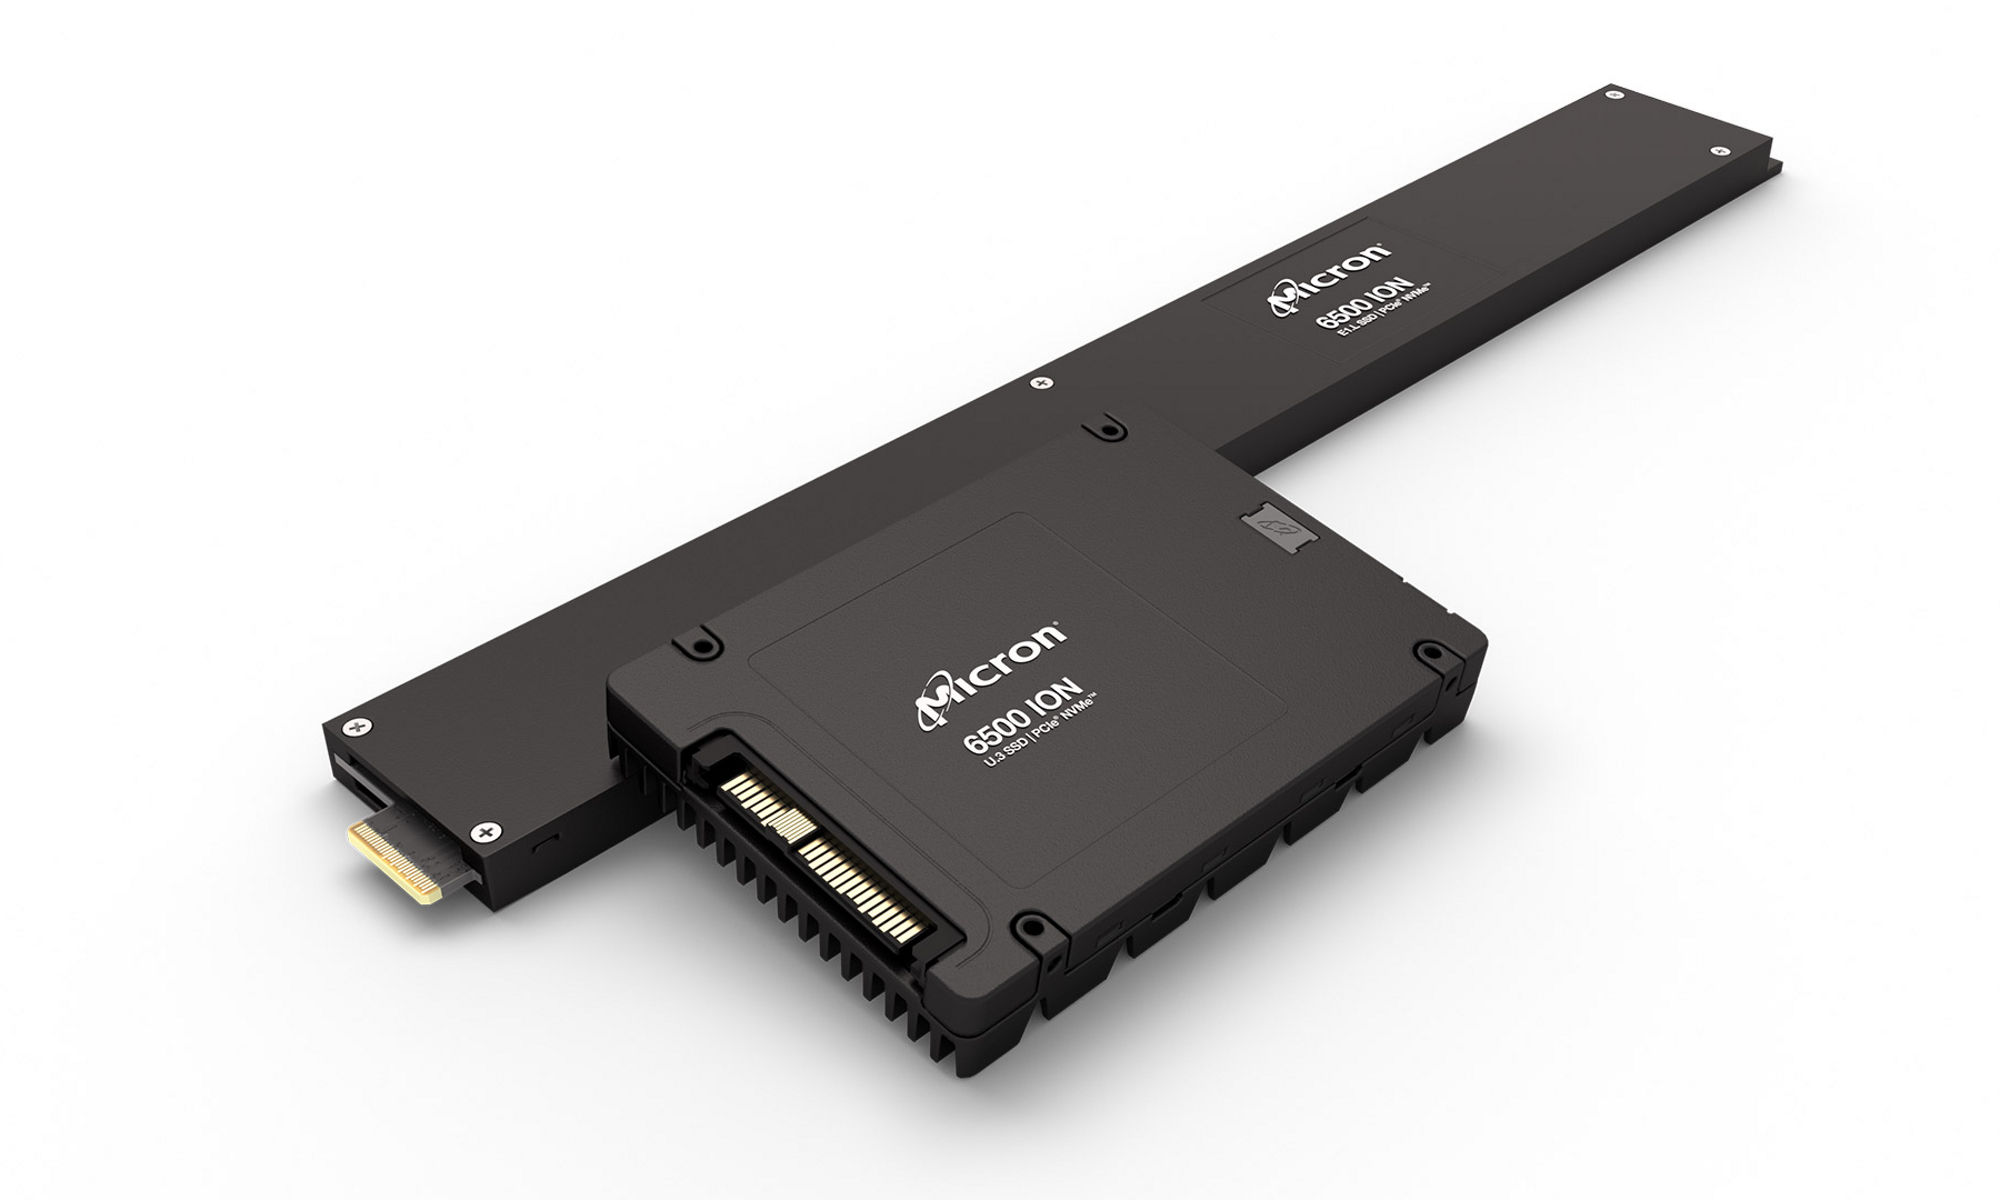 Micron 6500 ION NVMe SSDs